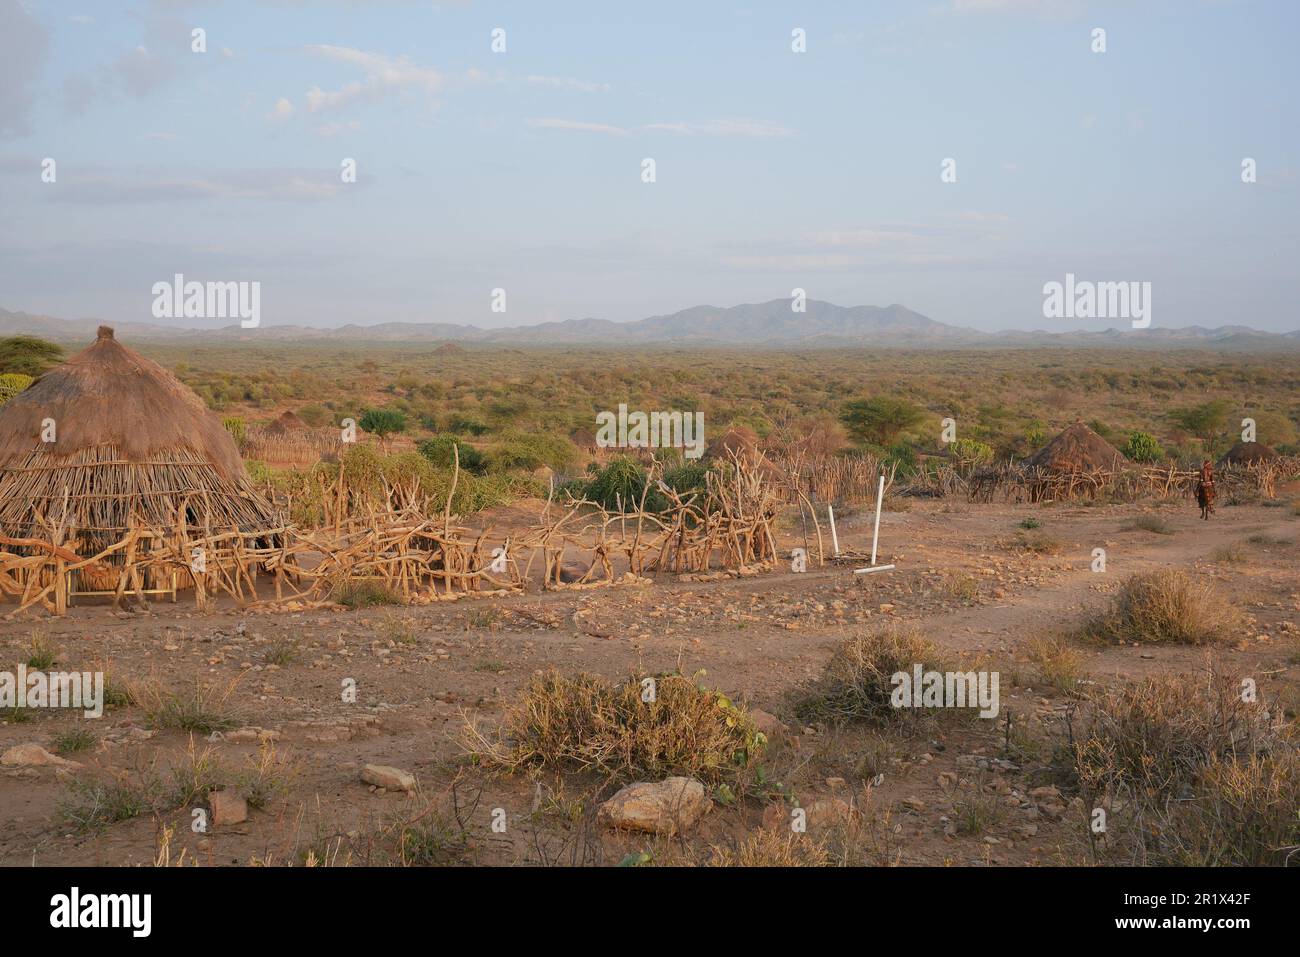 Hamar tribe village in the wilds of Omo Valley, Ethiopia Stock Photo